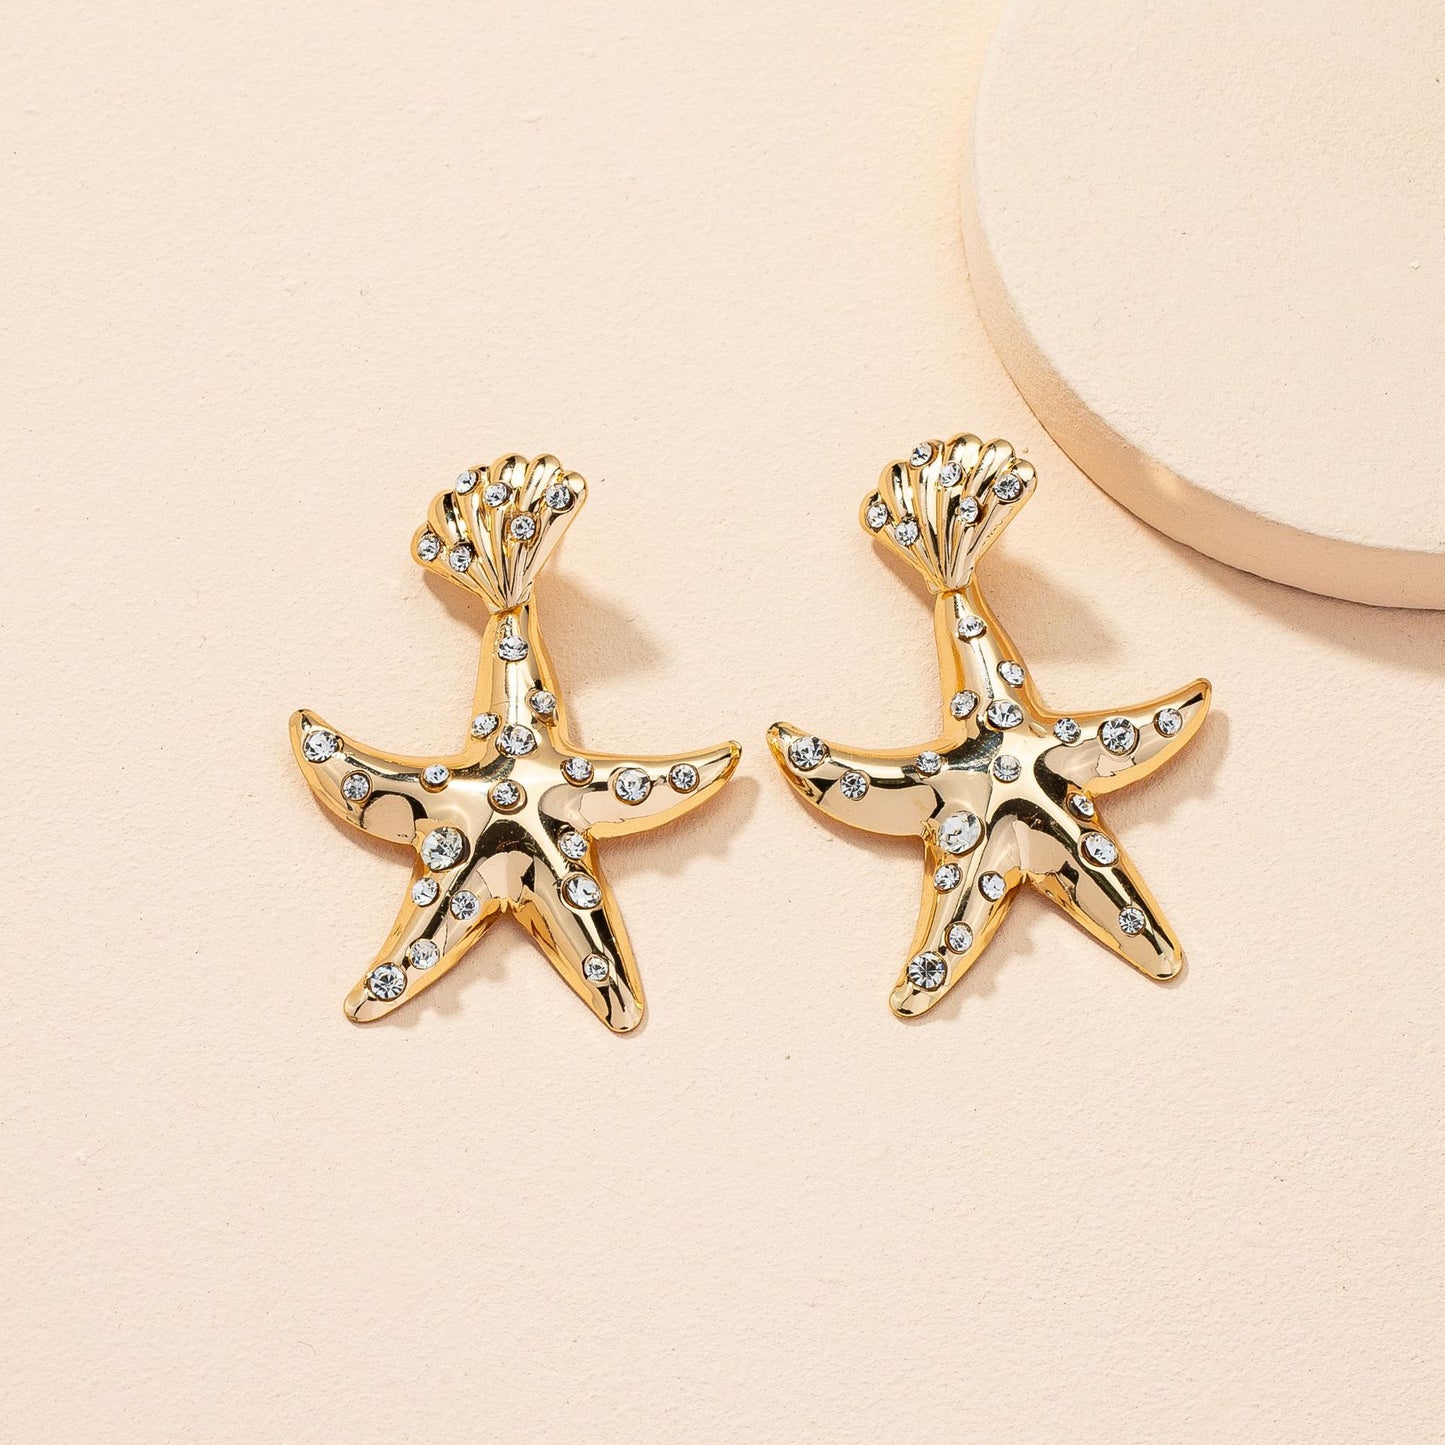 Starfish Starlet Earrings - Retro Exaggerated Fashion Jewelry for Women